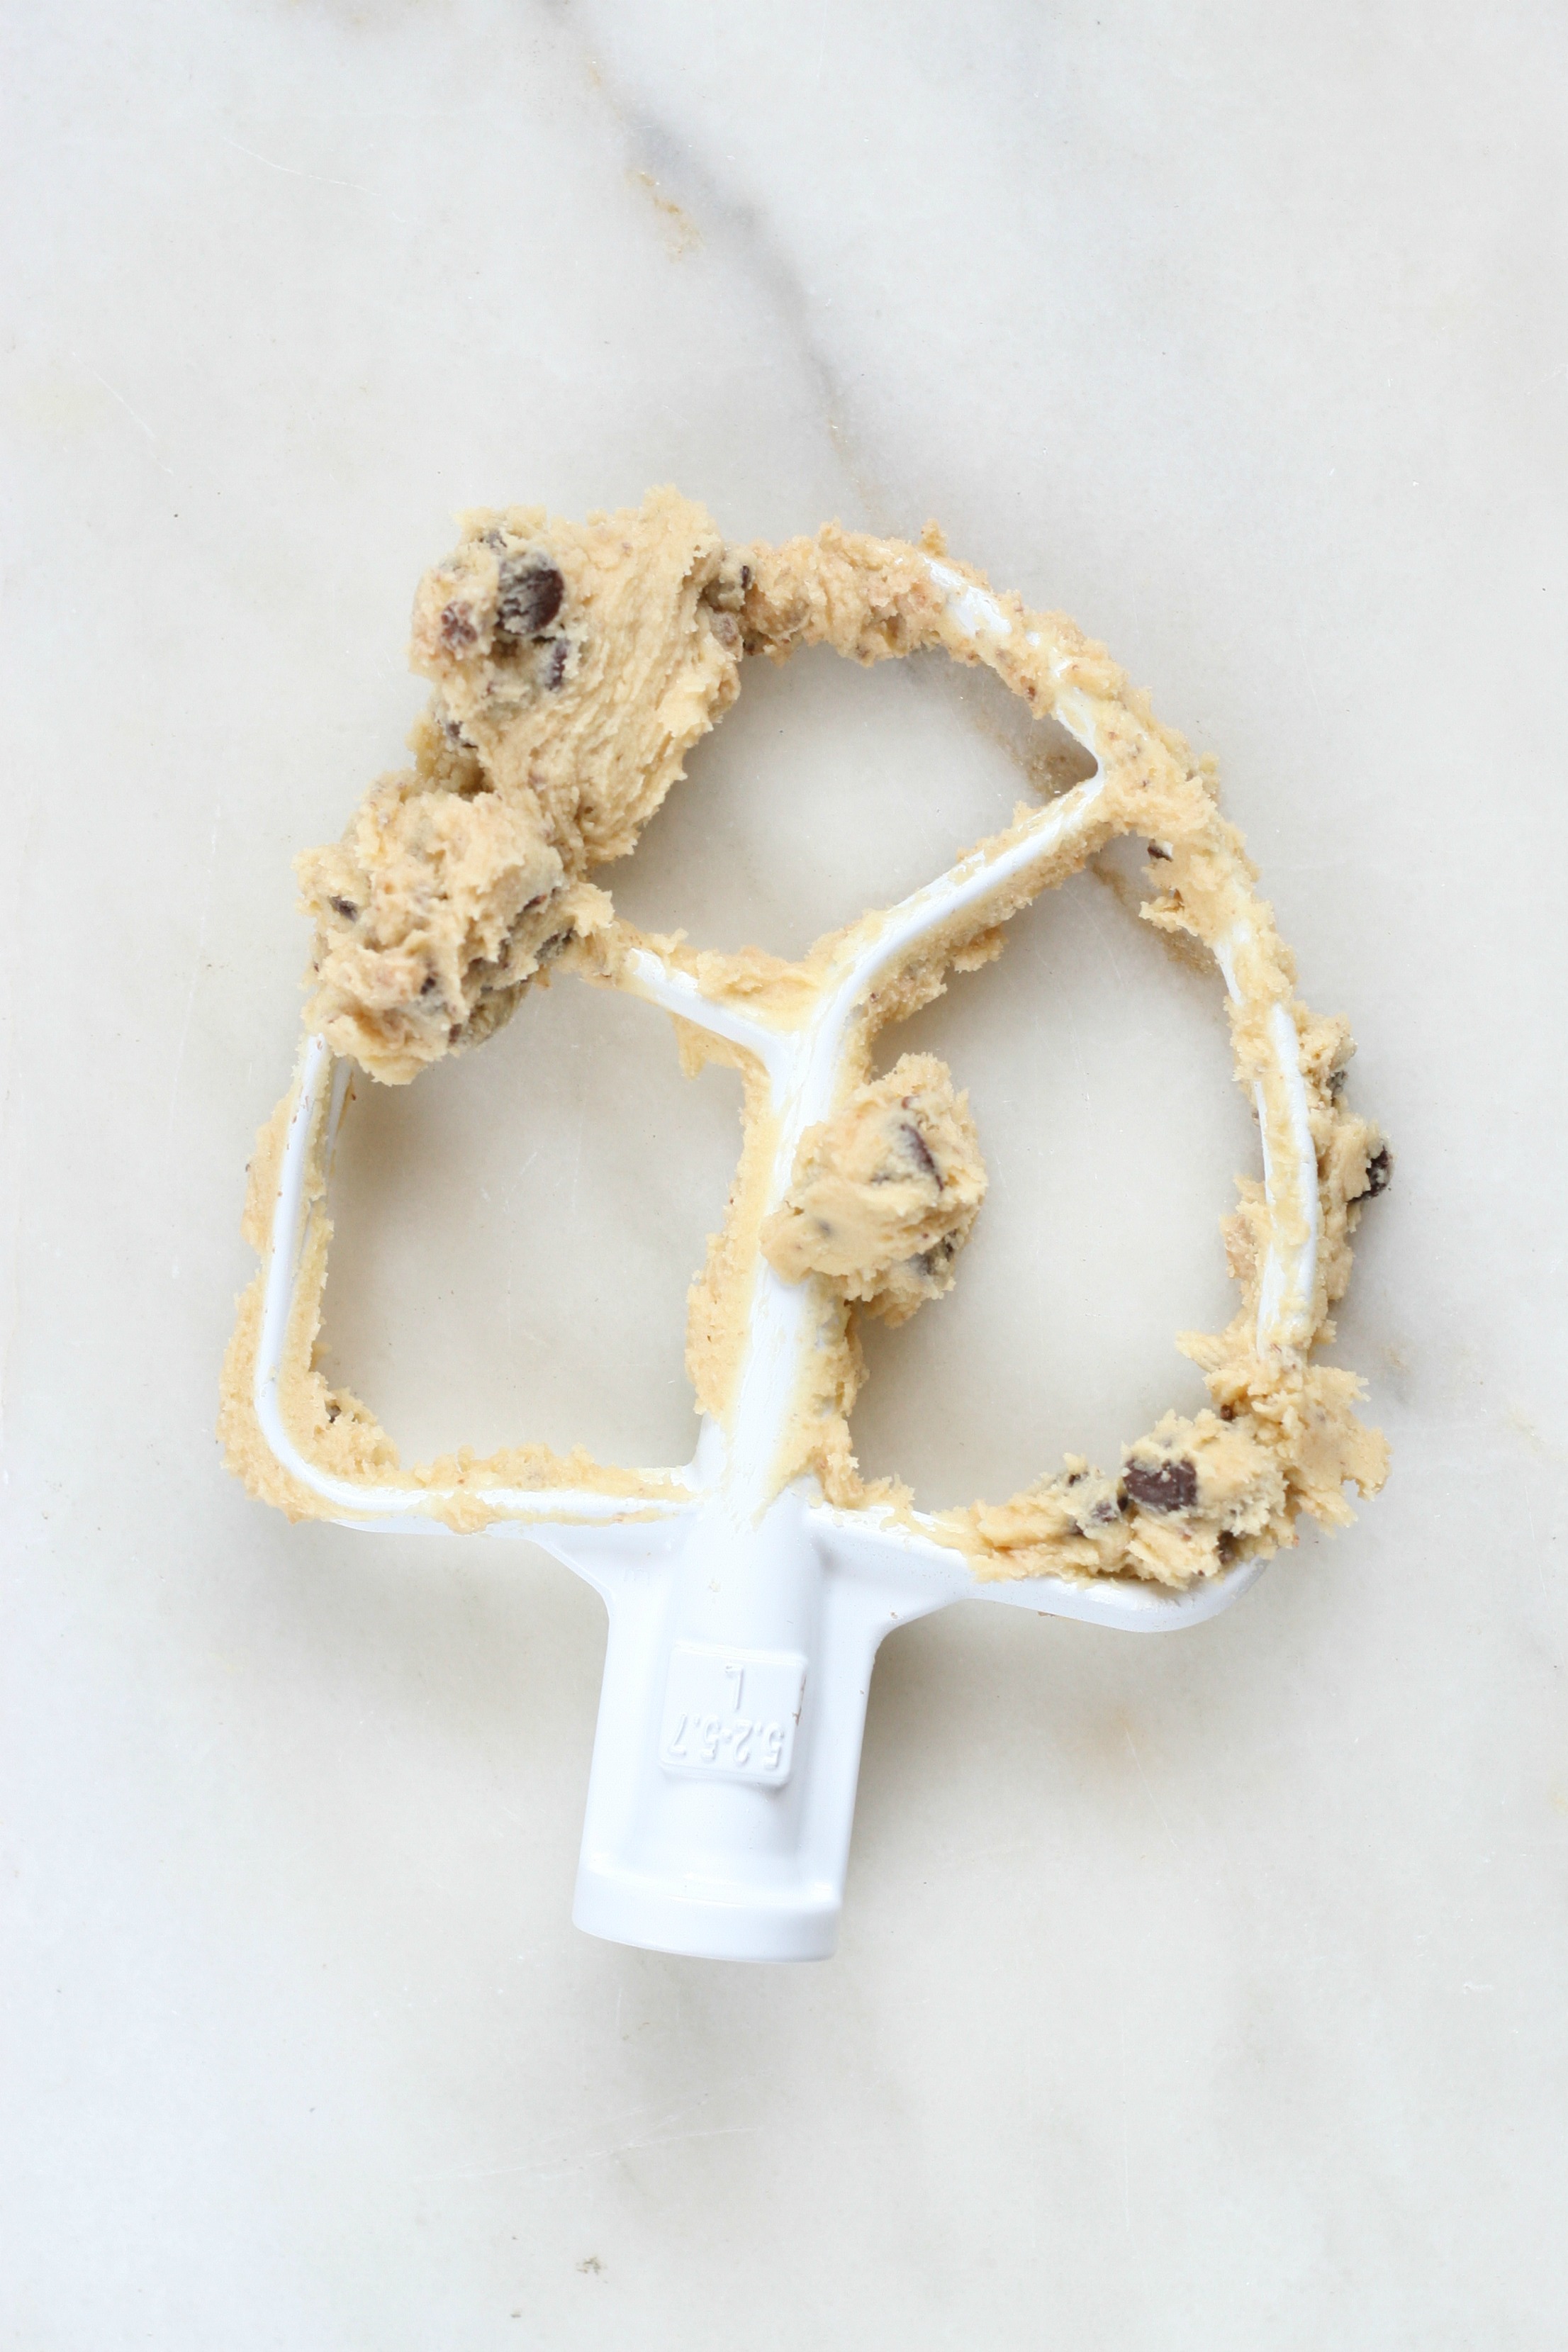 Chocolate chip cookie dough on Kitchenaid beater, sitting on white marble.